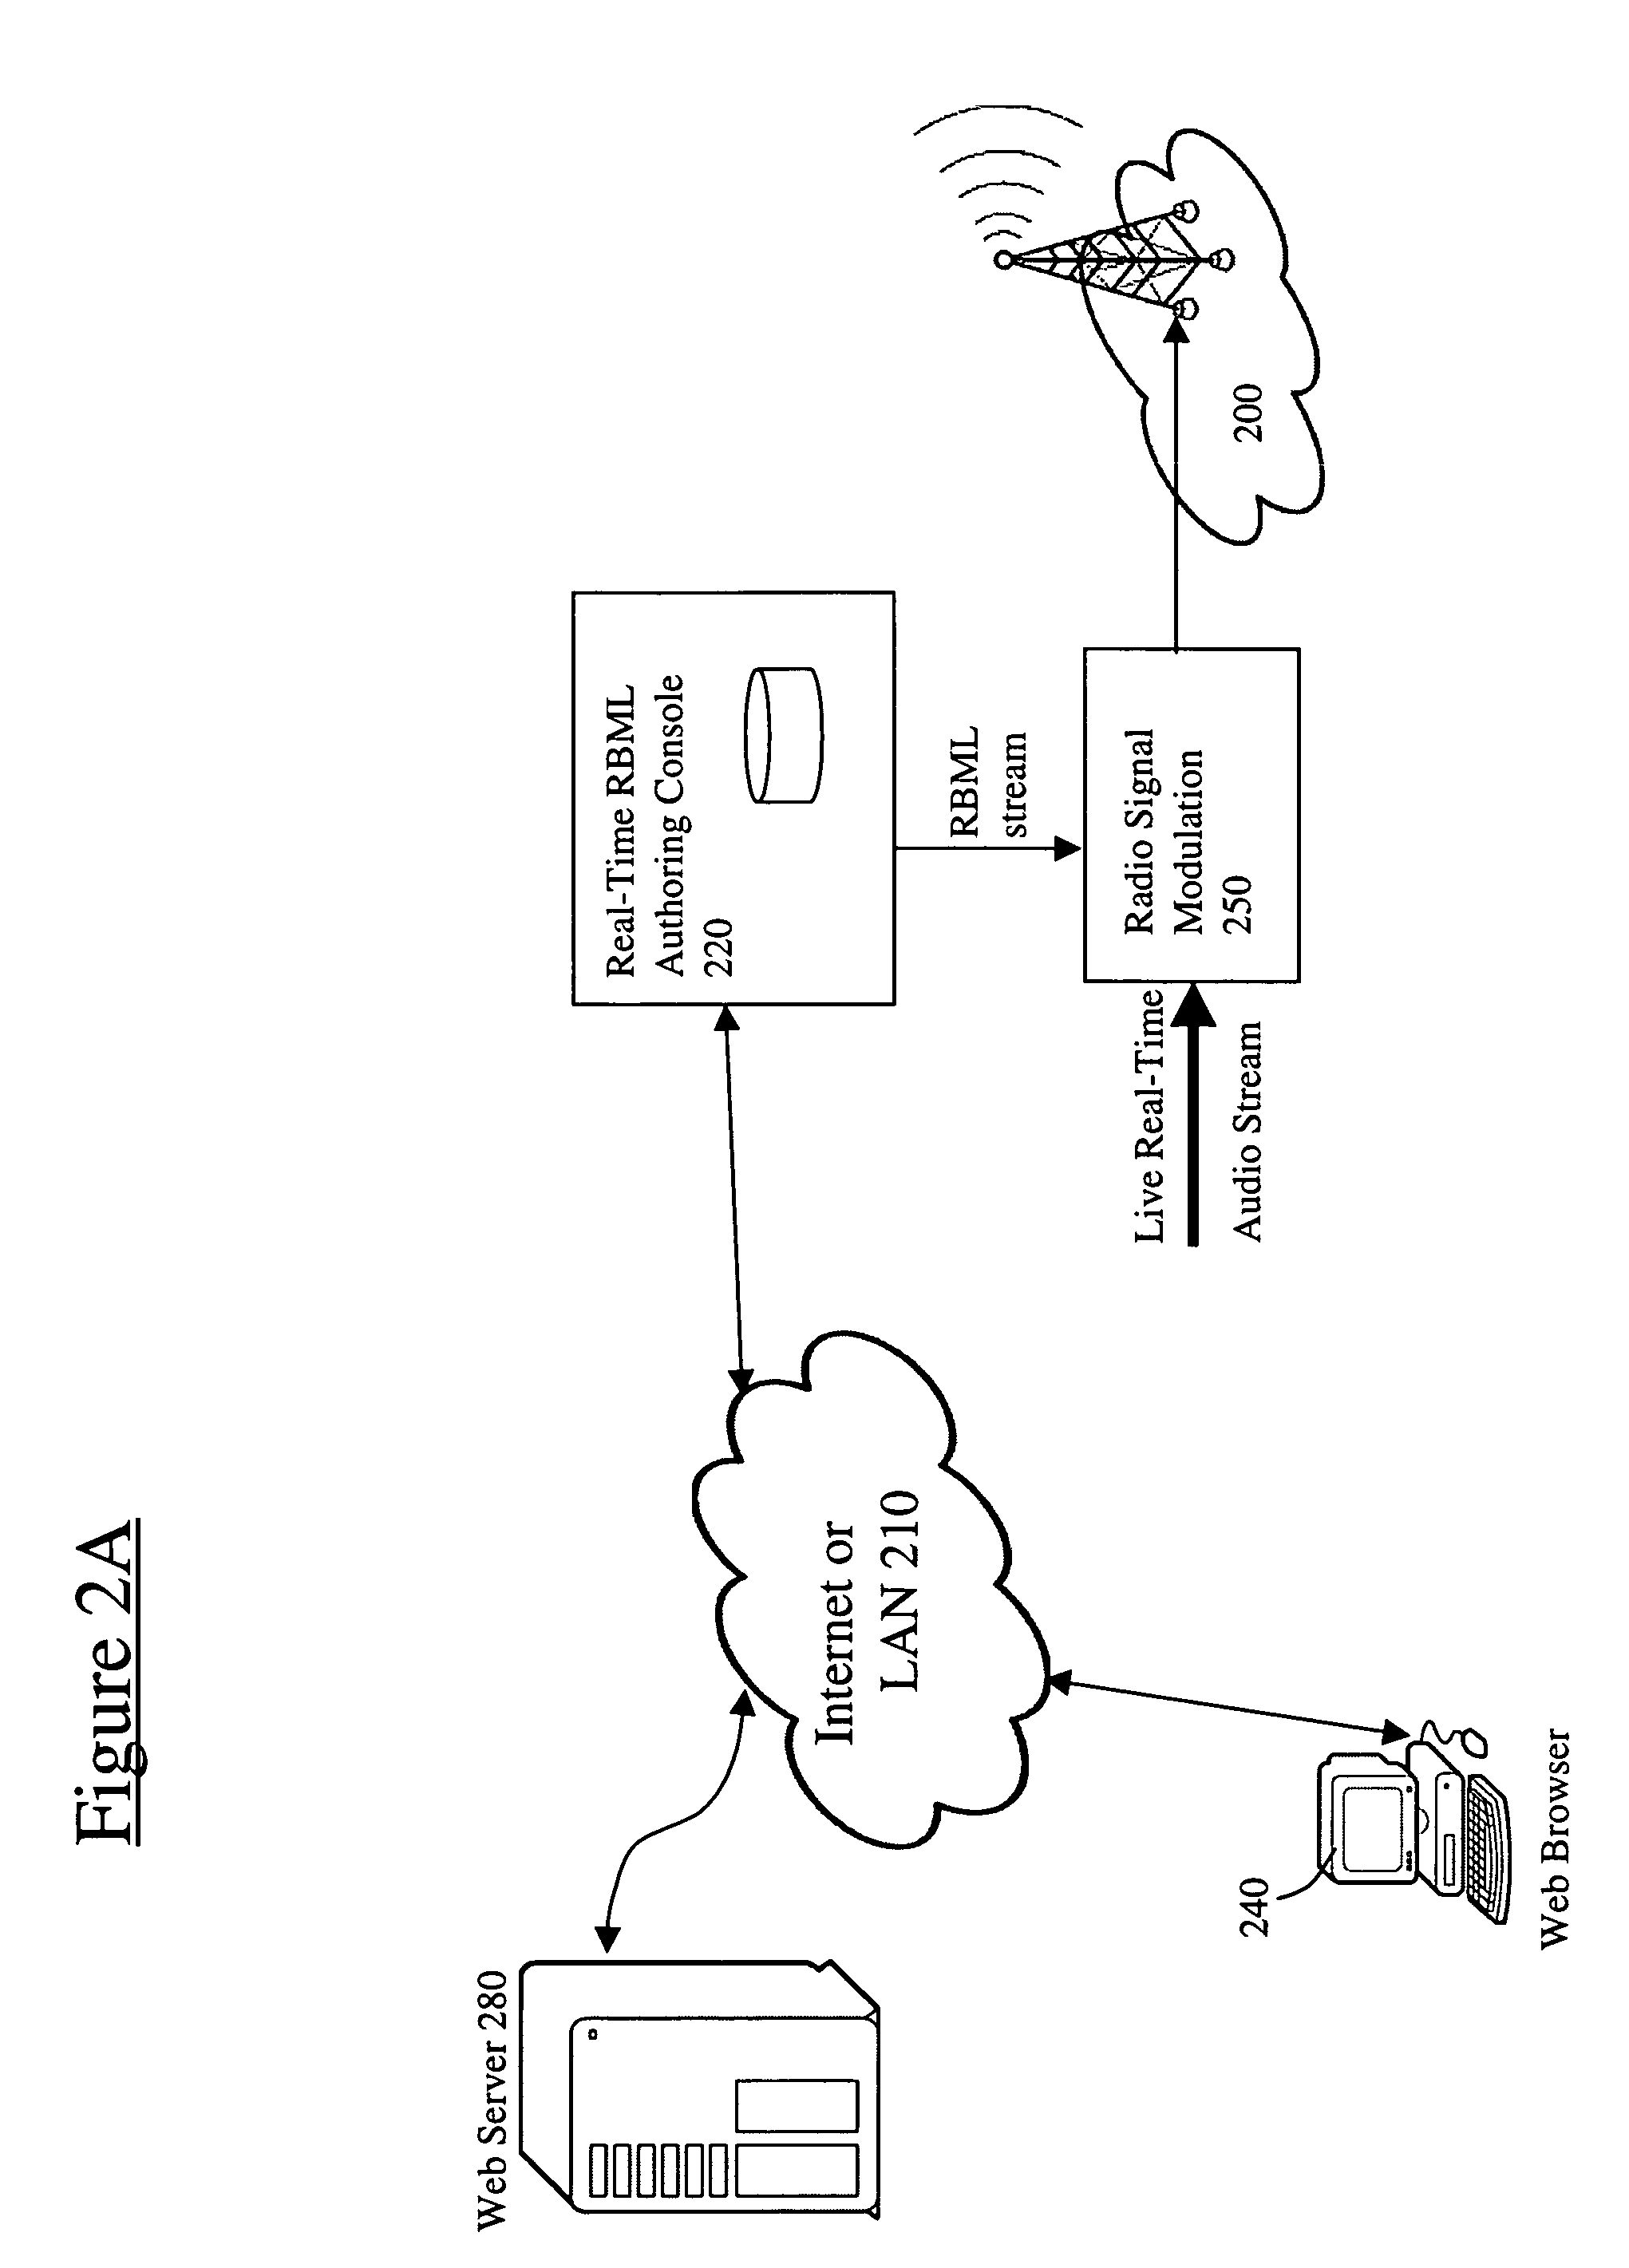 Method and apparatus for an interactive Web Radio system that broadcasts a digital markup language